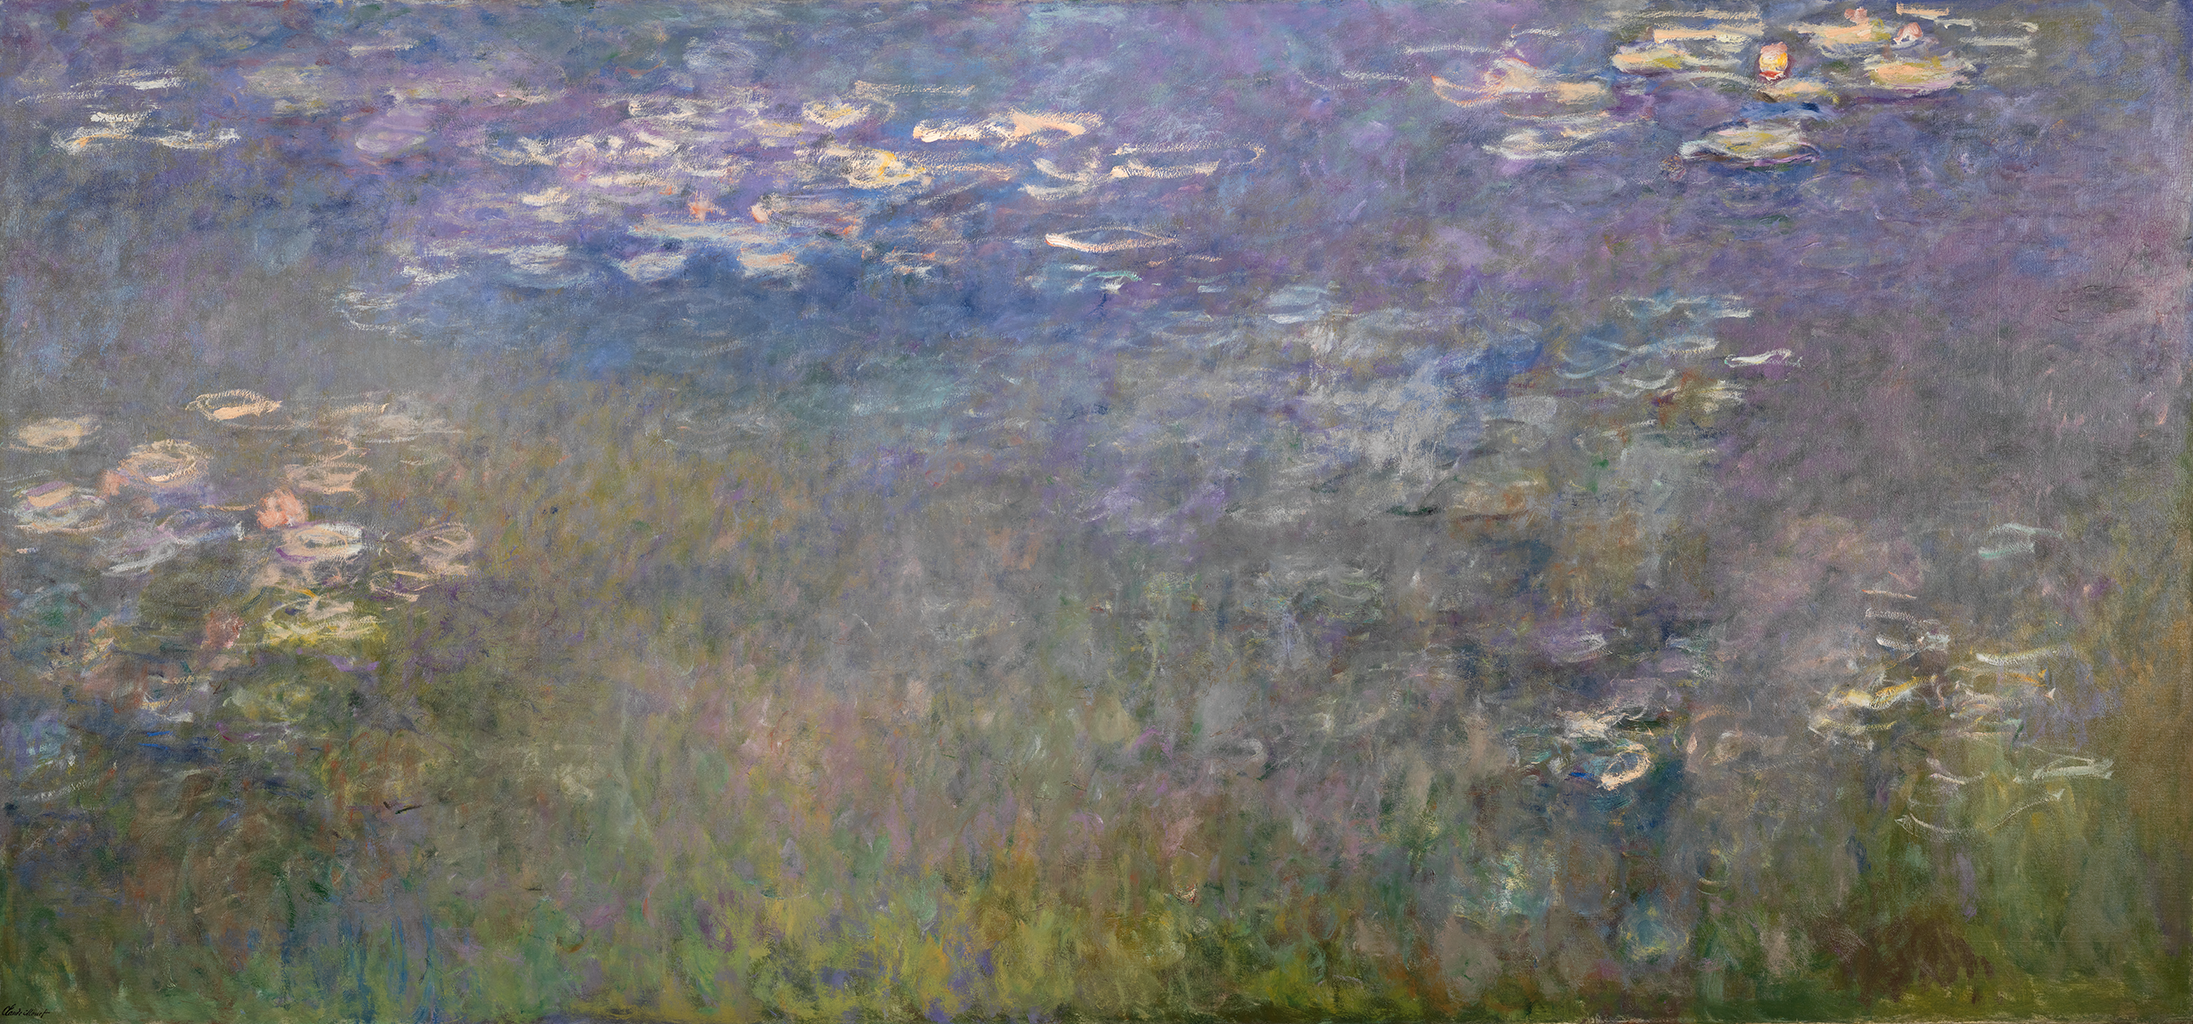 Impressionistic view of a pool with three main groups of waterlilies executed in greens, blues, pinks, purple, and white.